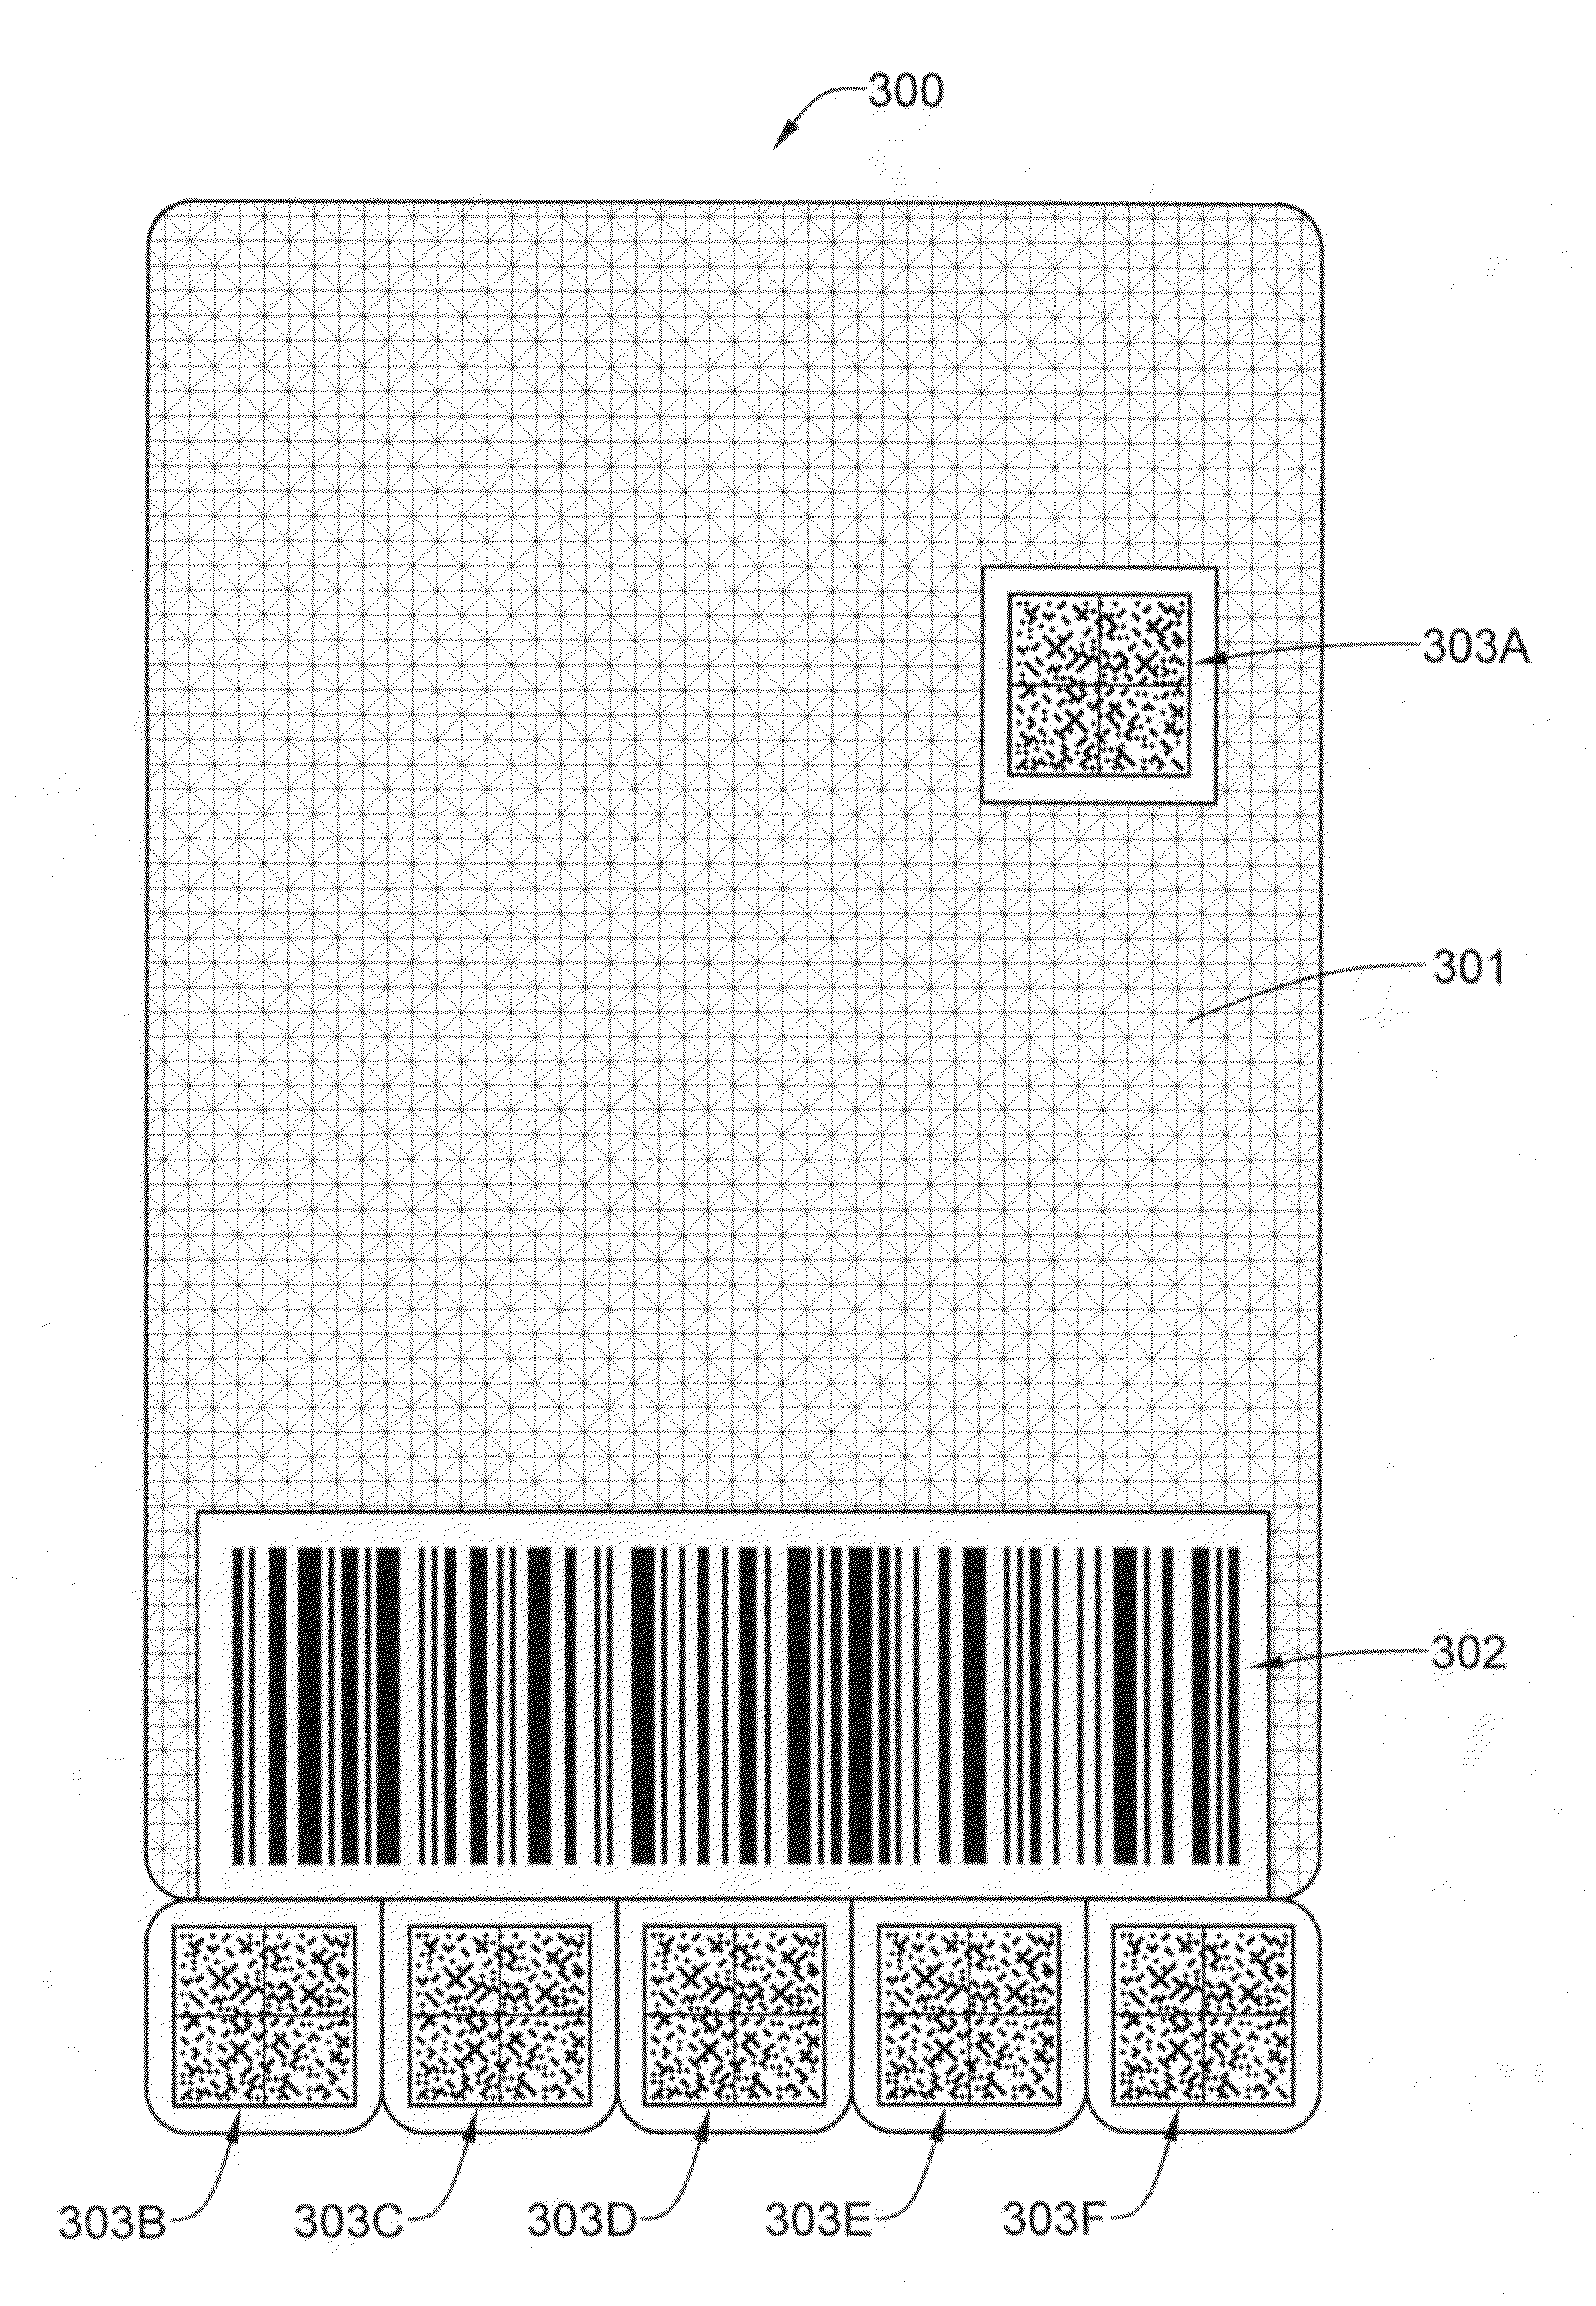 Method of labeling a package for shipment